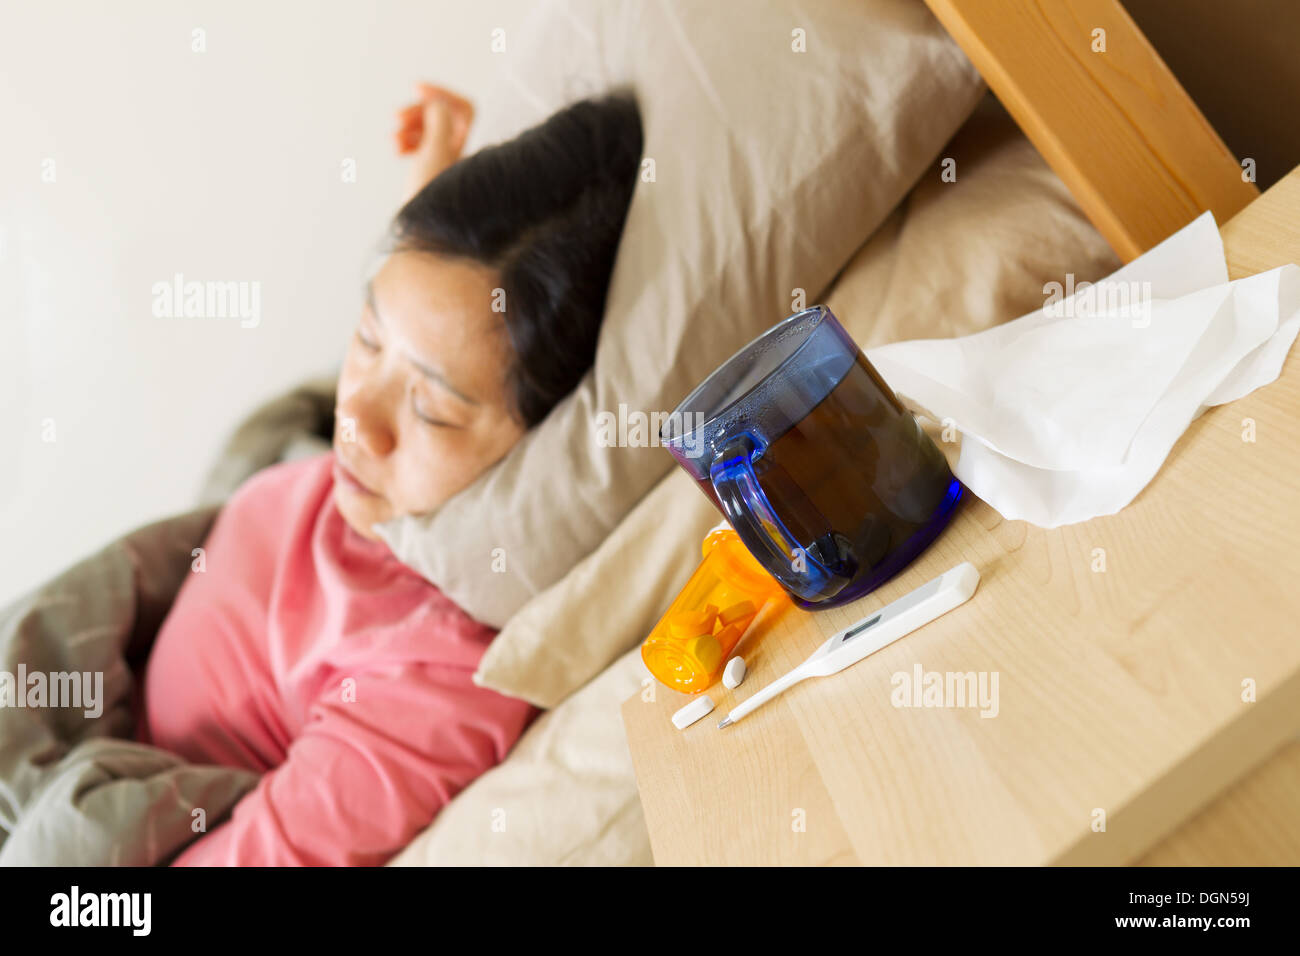 Horizontal photo of glass of hot tea, thermometer, tissues, and medicine on night stand with woman lying on her back while sick Stock Photo